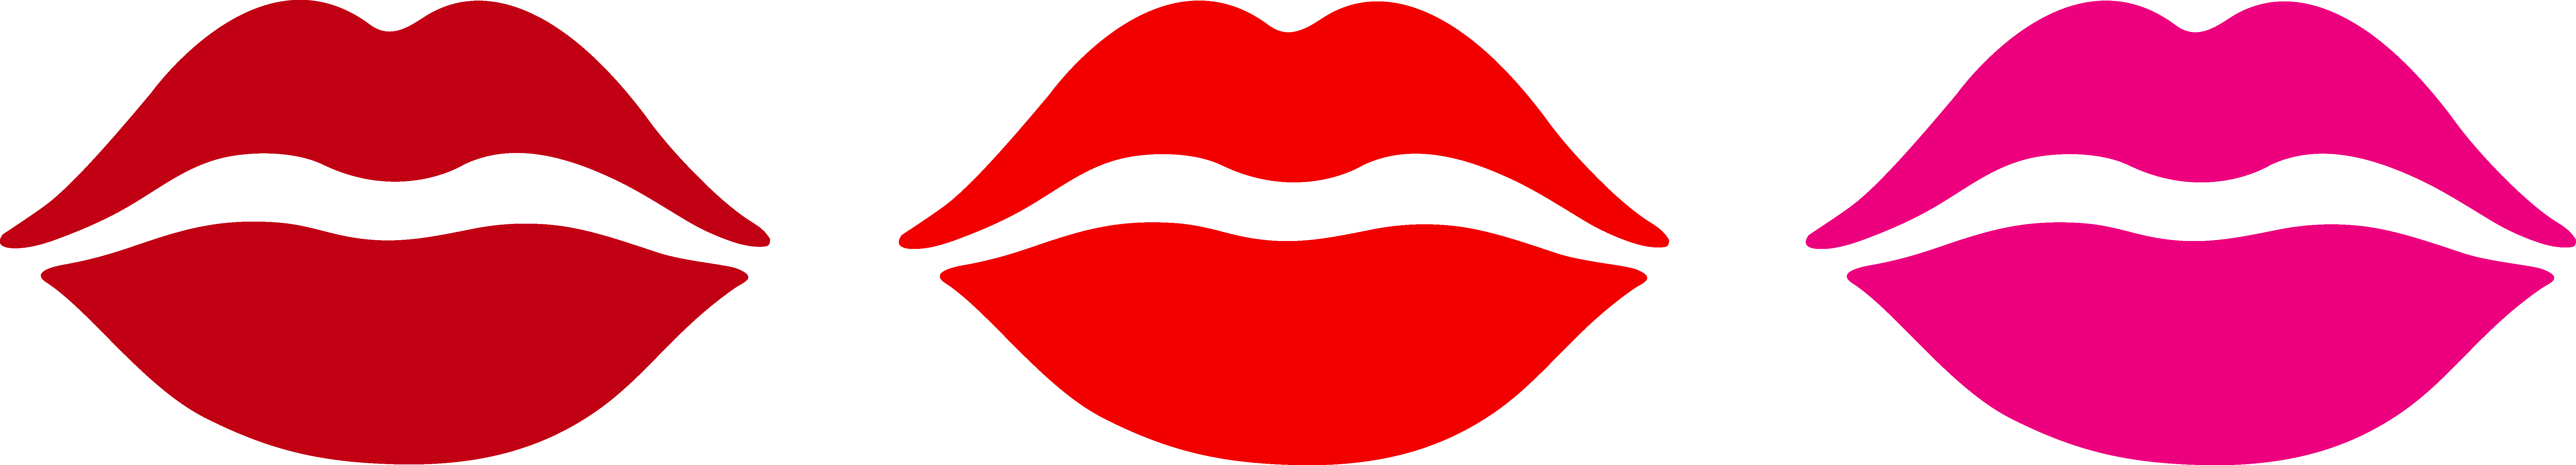 Image of Kissy Lips Clip Art #7981, Red Lips Vector - Clipartoons